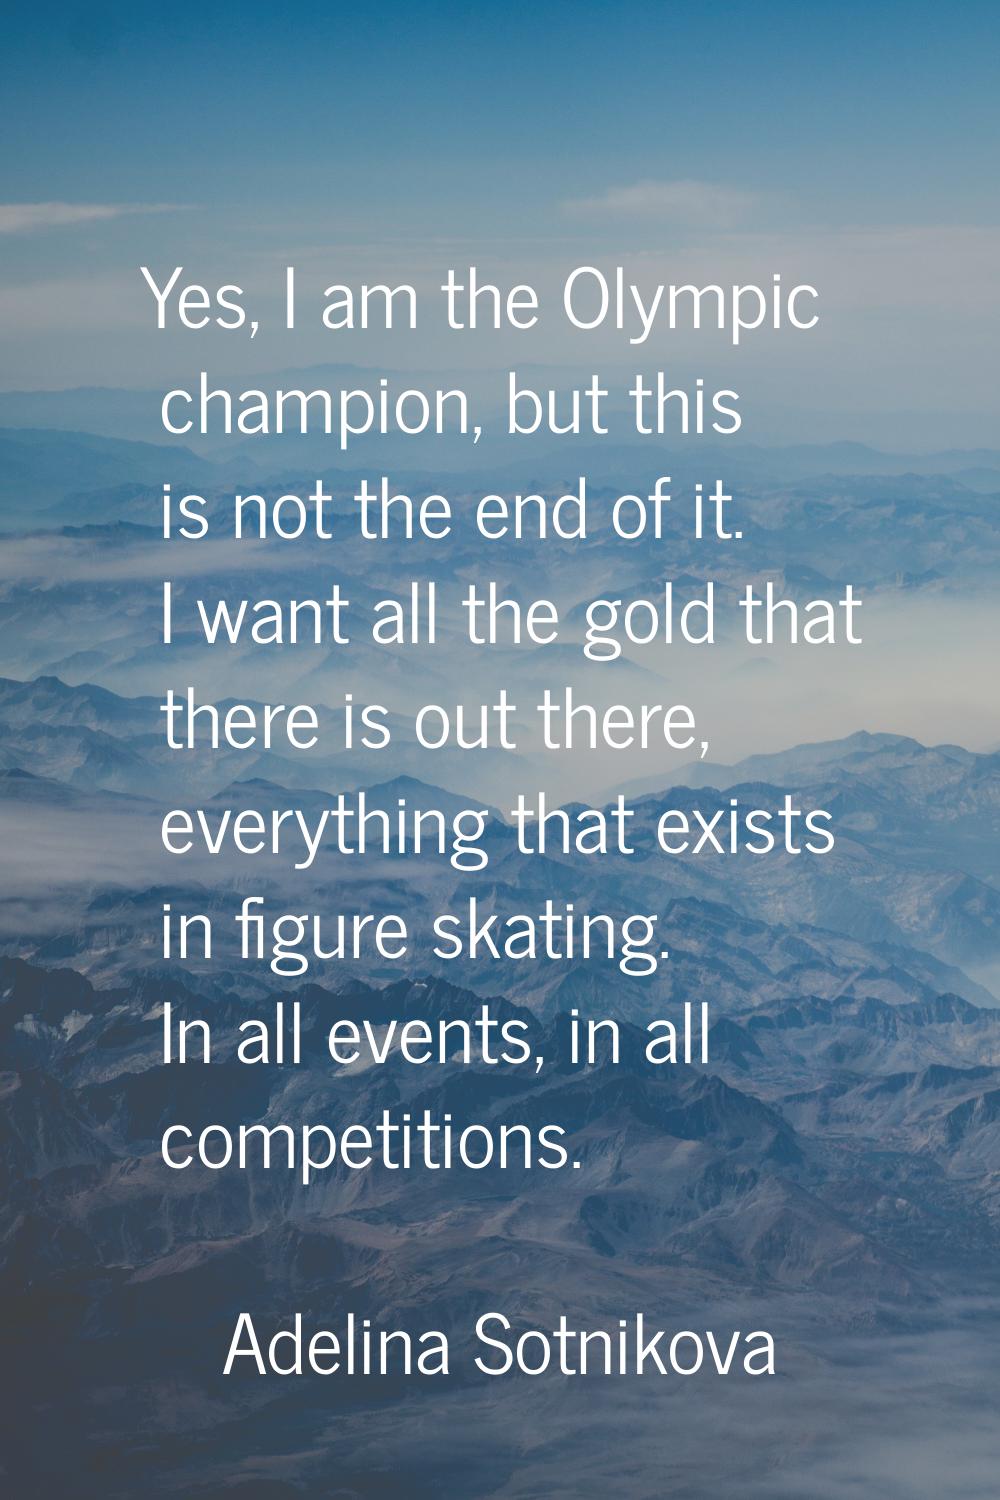 Yes, I am the Olympic champion, but this is not the end of it. I want all the gold that there is ou